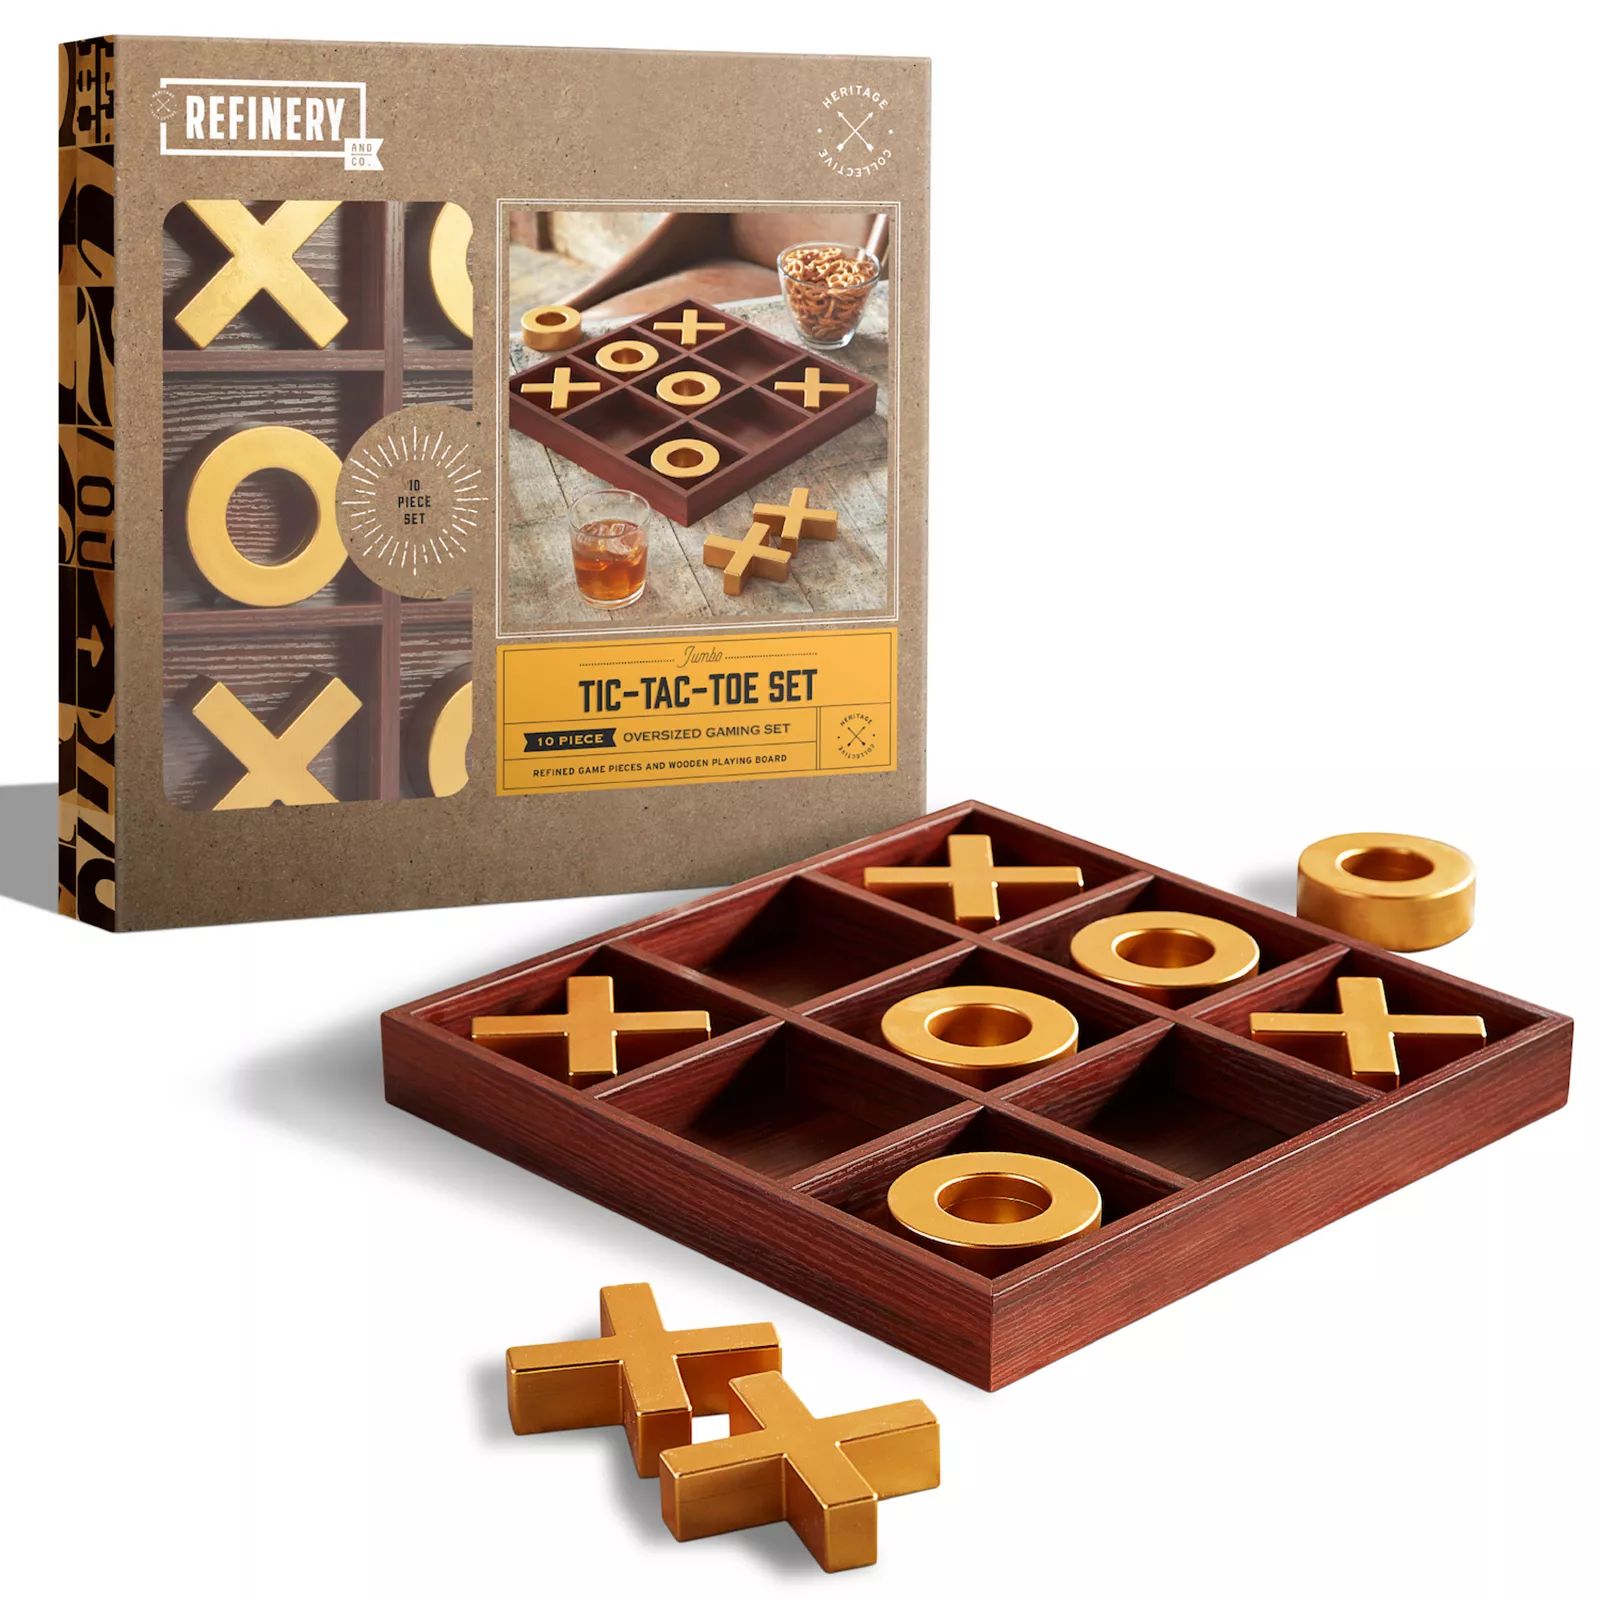 Refinery Gold Tone Tic-Tac-Toe Game, Lt Brown | Kohl's